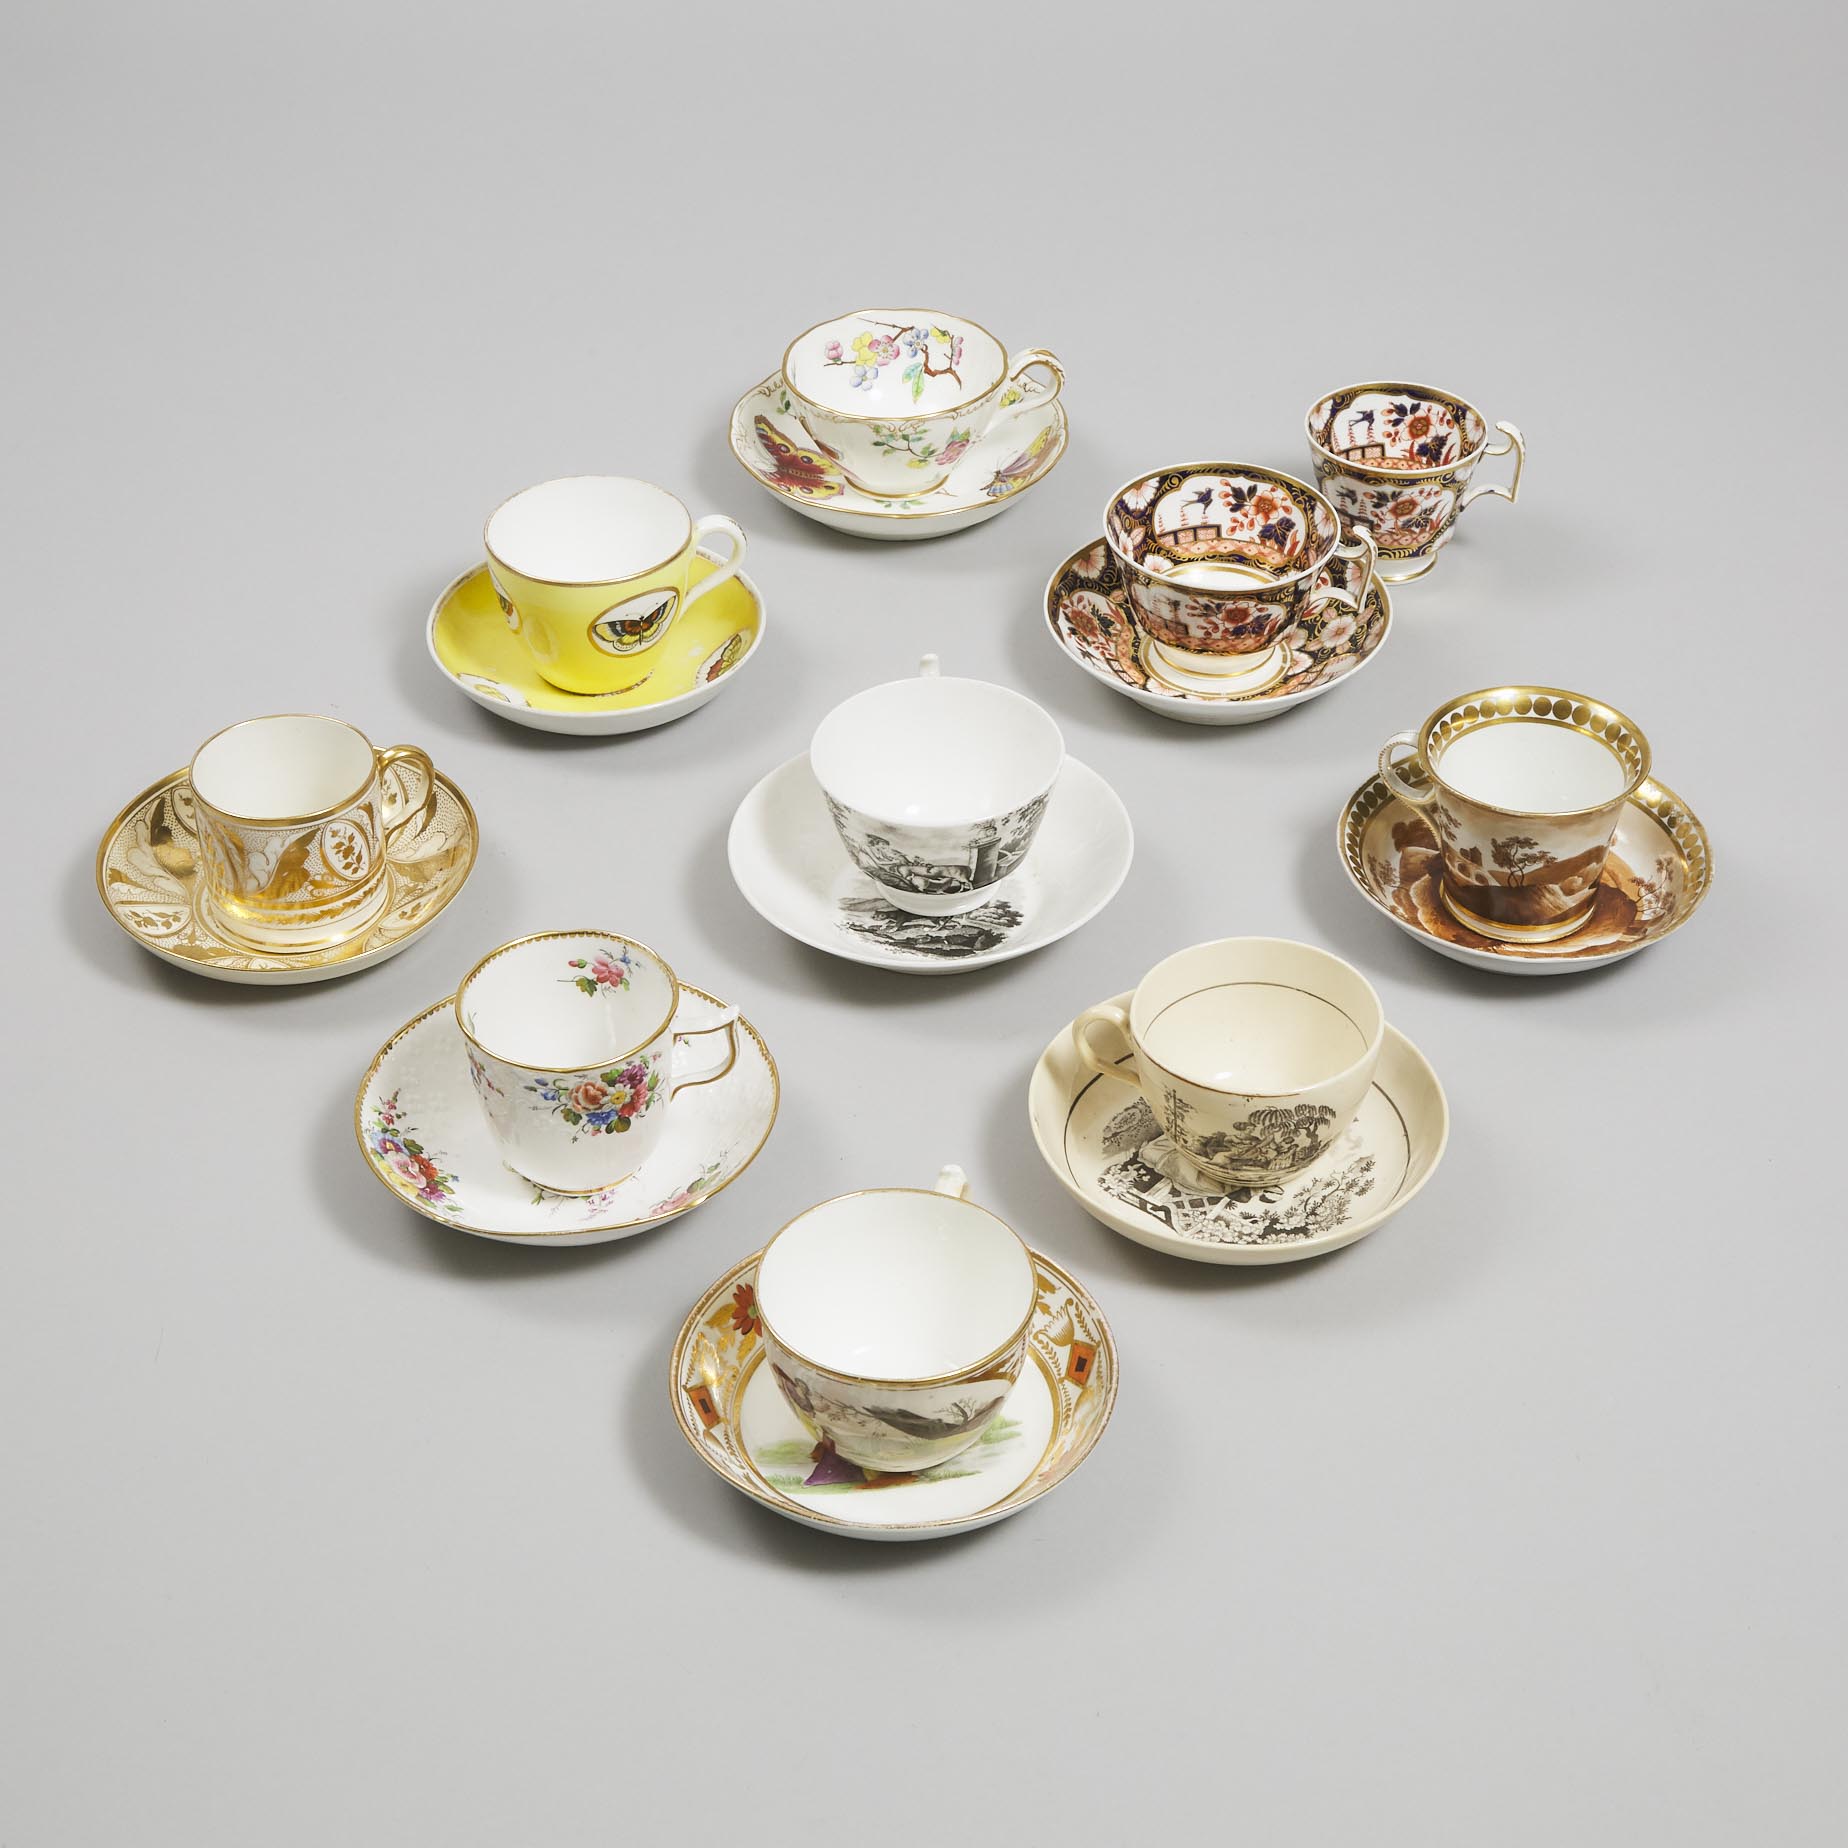 Eight English Porcelain Cups and Saucers and a Trio, early 19th century